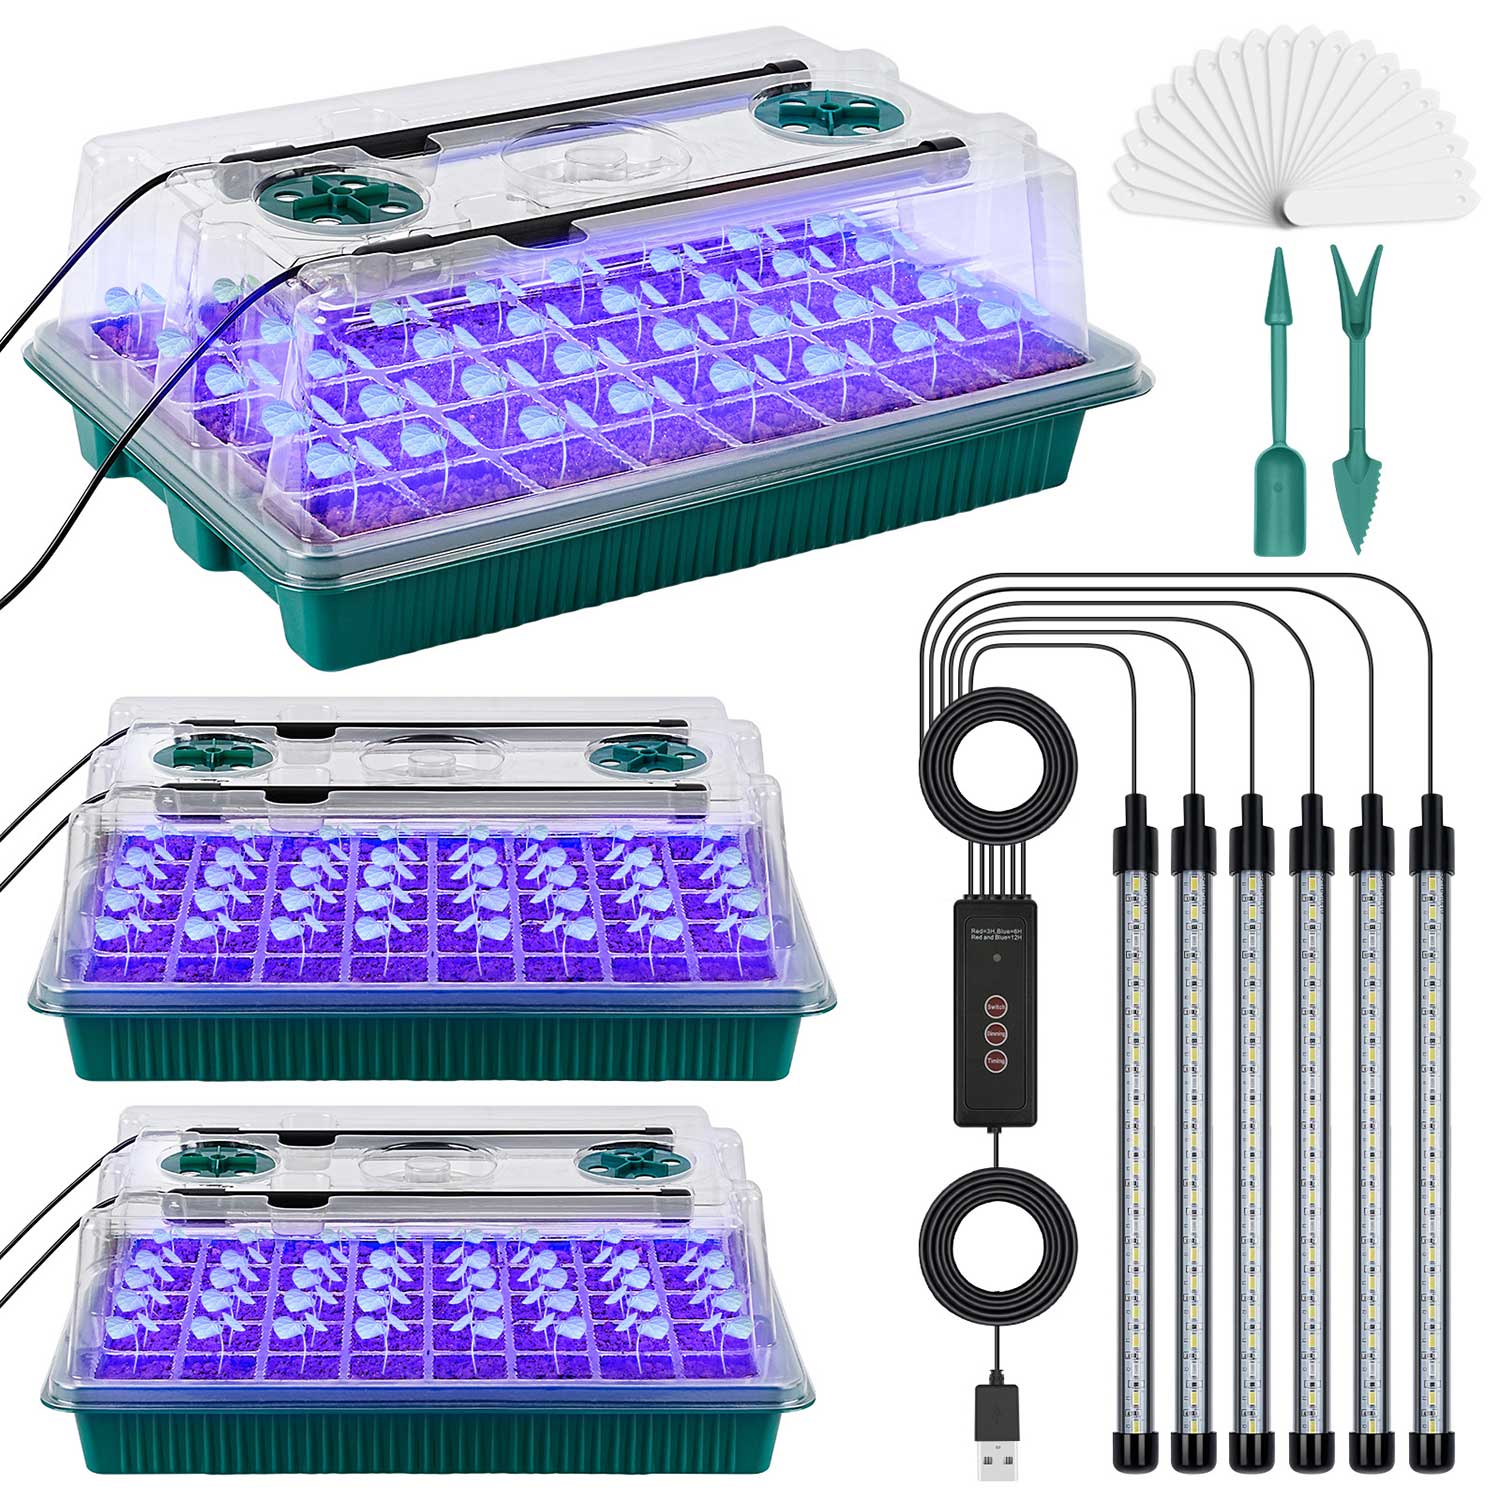 3 Packs Seed Starter Tray with Grow Light High Dome Seed Germination Kit 120 Cells with 6 LED Grow Lights Seedling Starter Kit with Smart Timer White&Blue Fullspectrum Growth Light